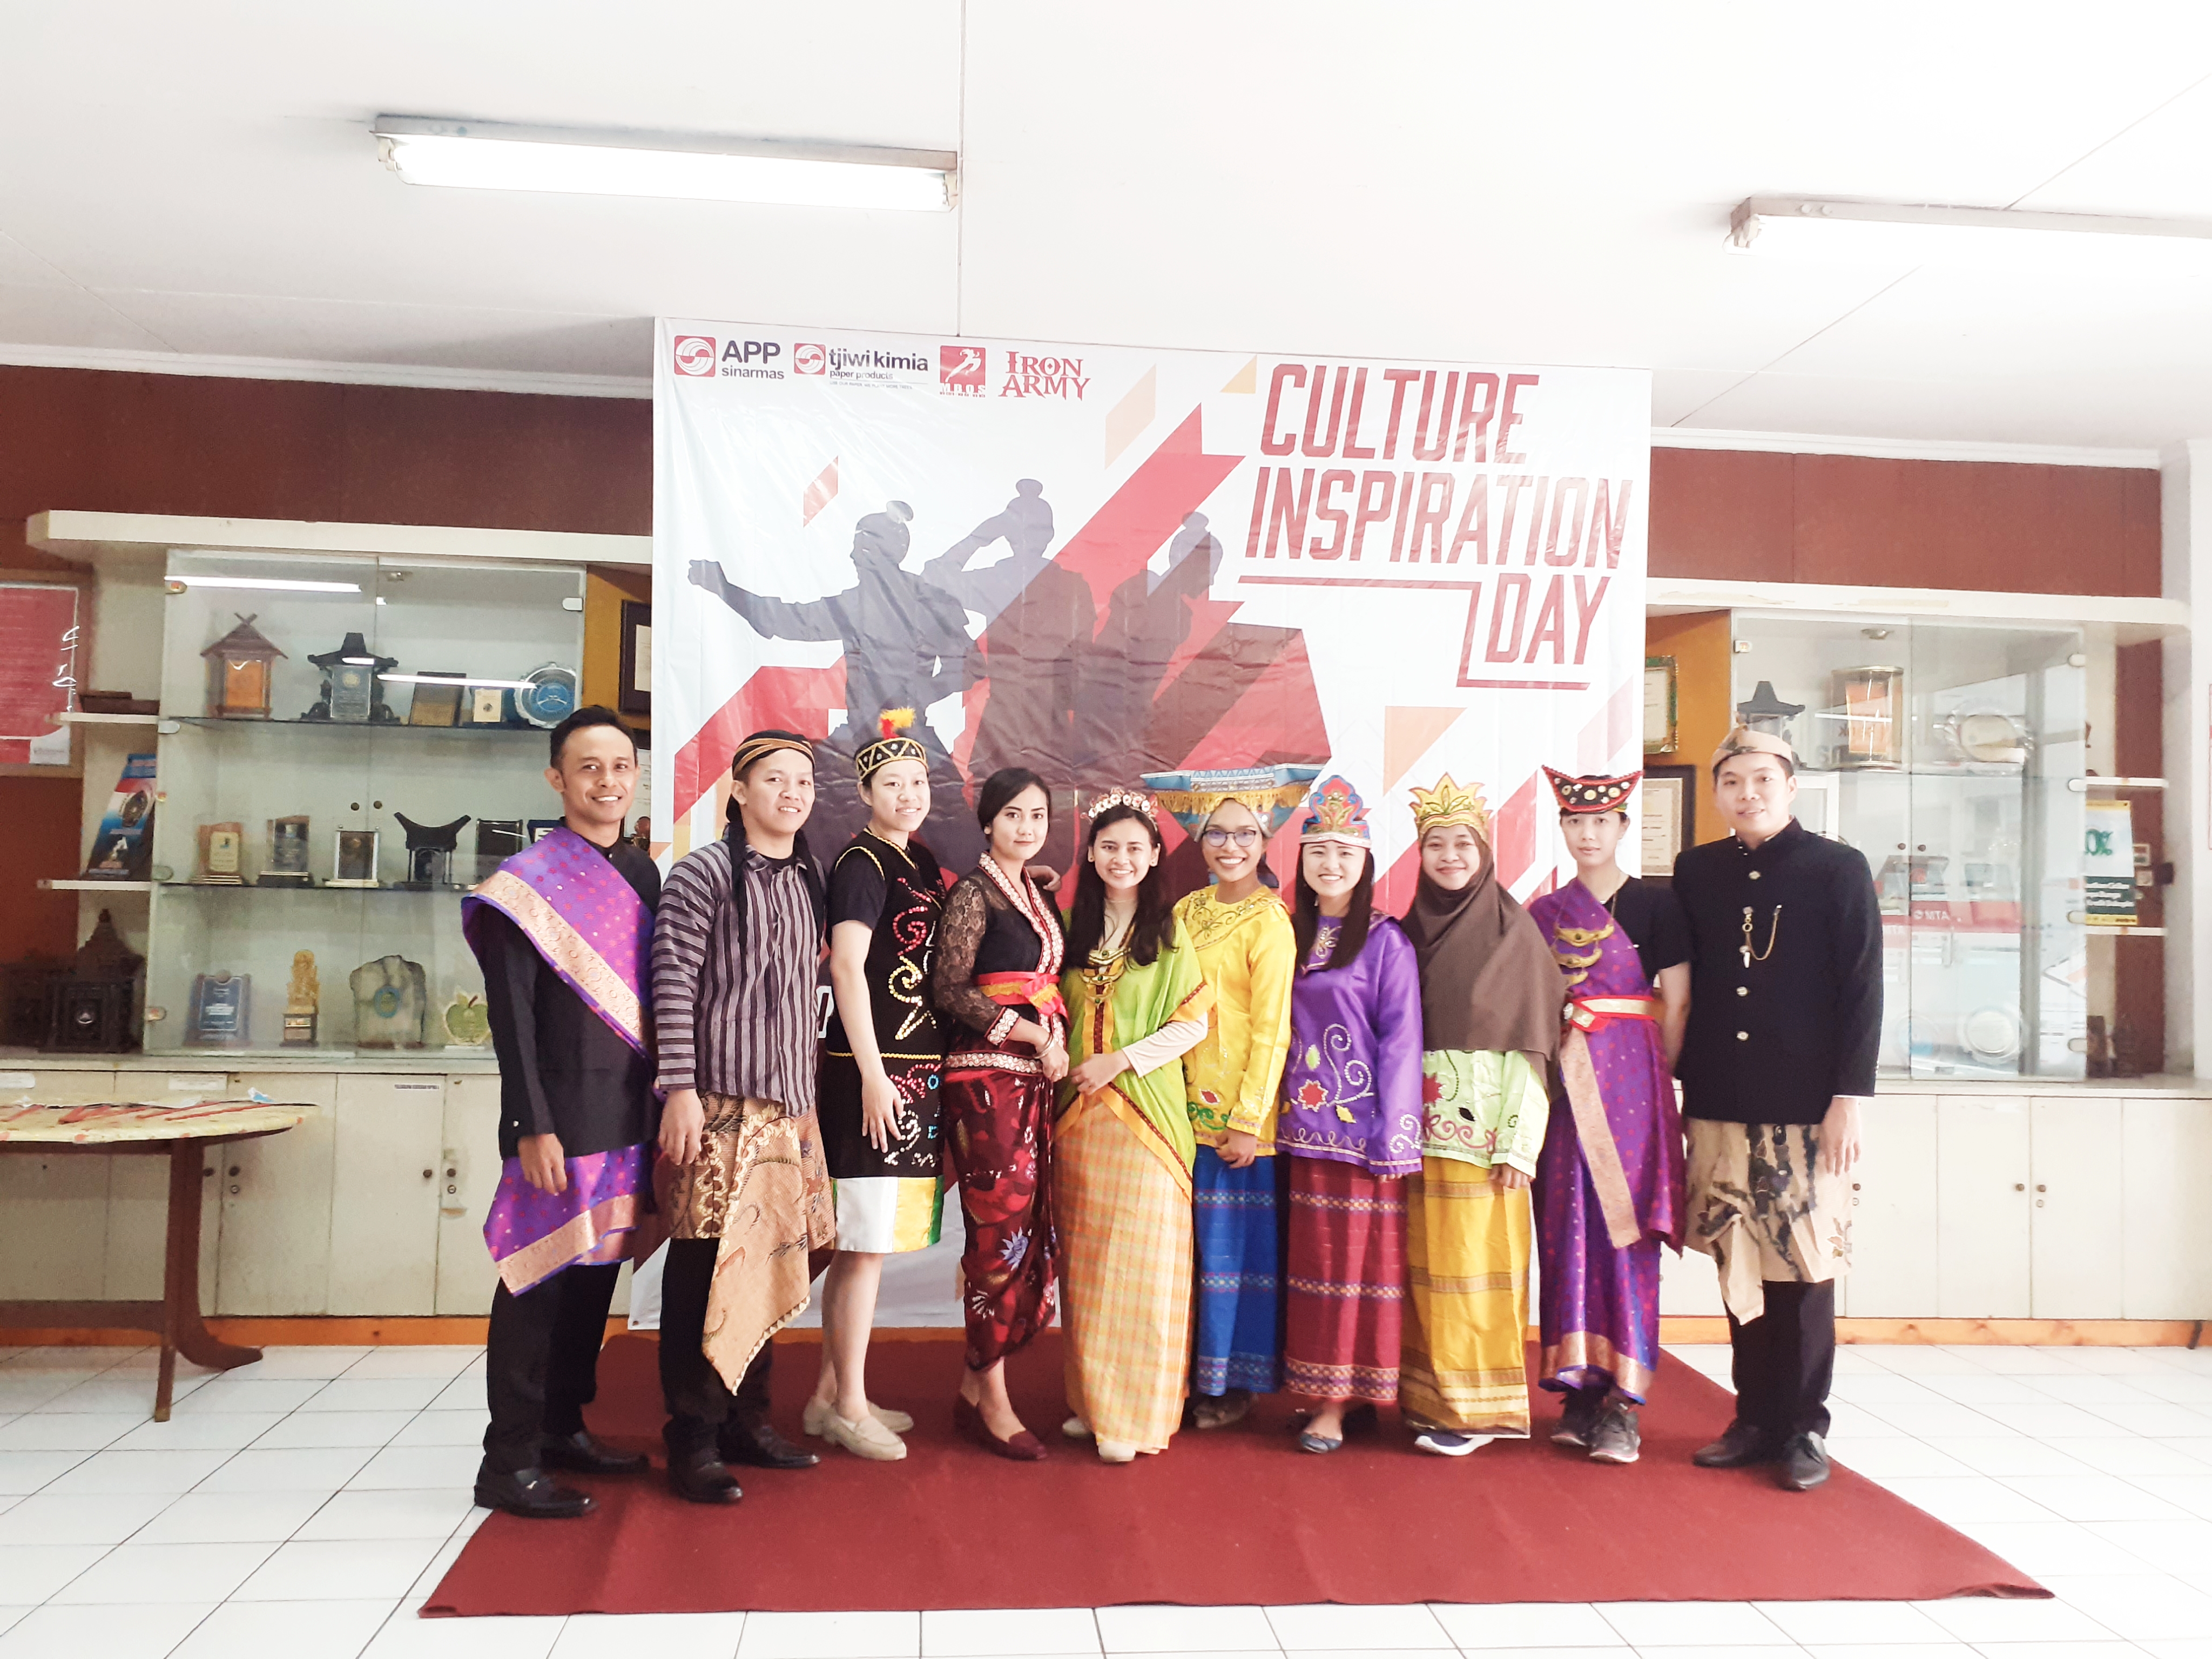 CULTURE INSPIRATION DAY